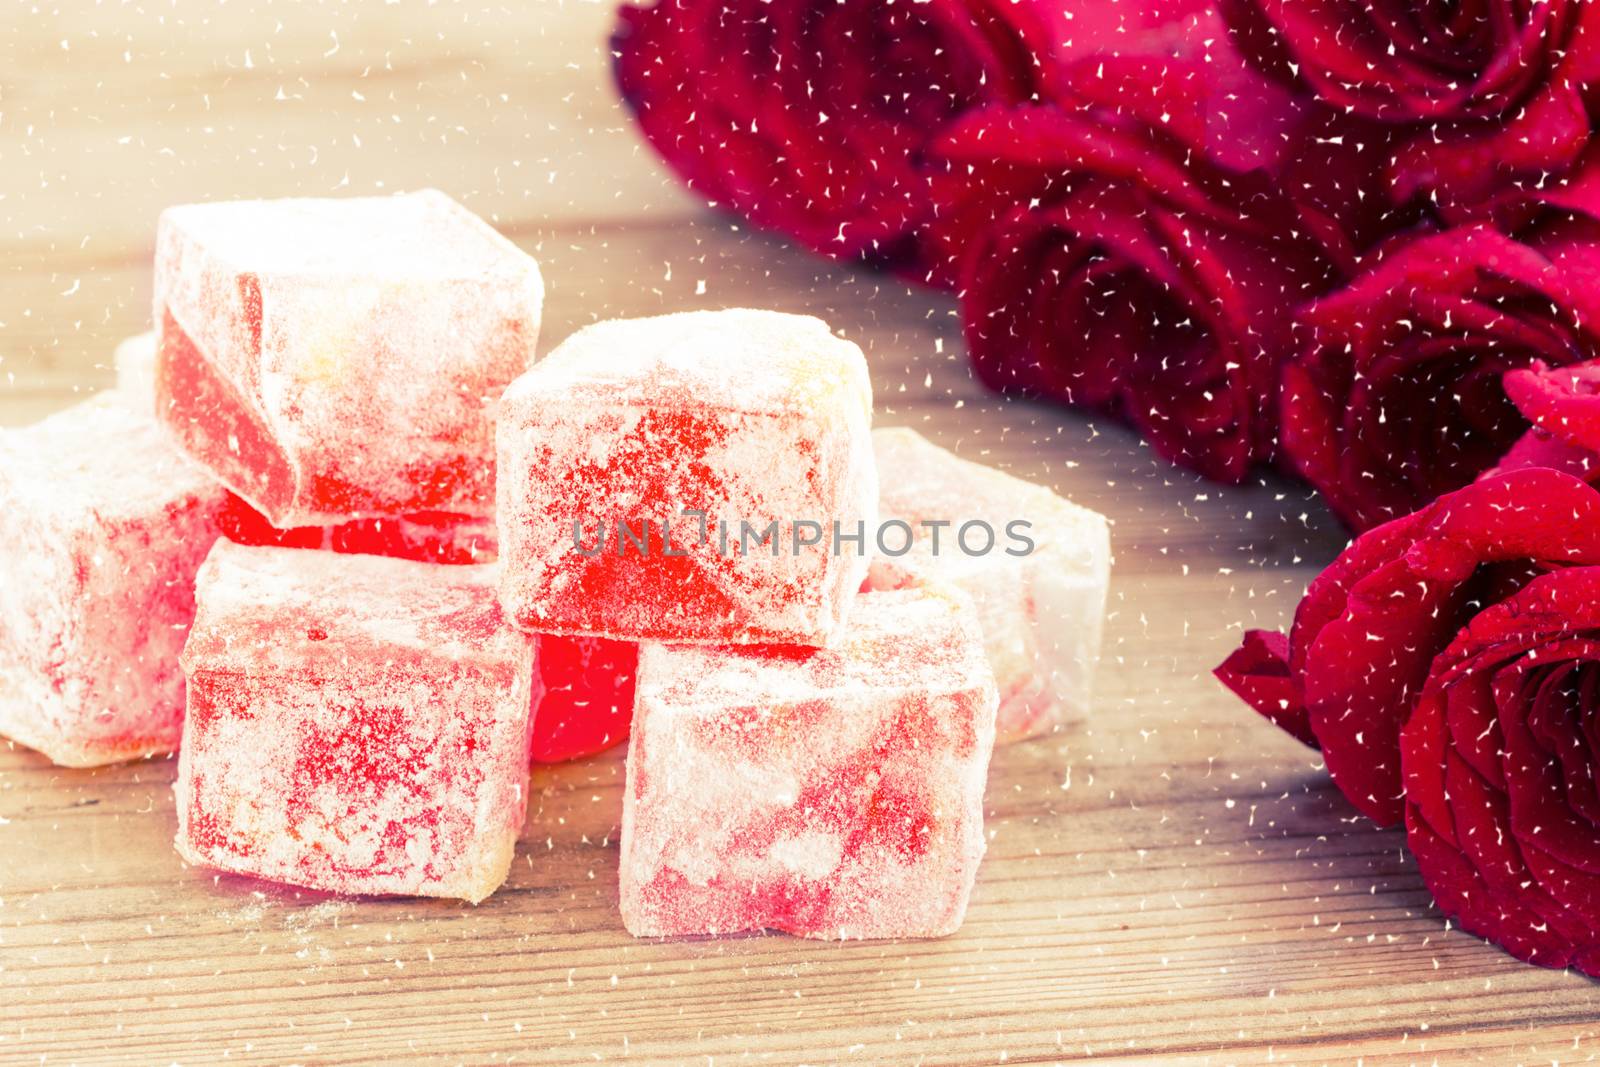 Delicious Turkish Delight of Roses on a table